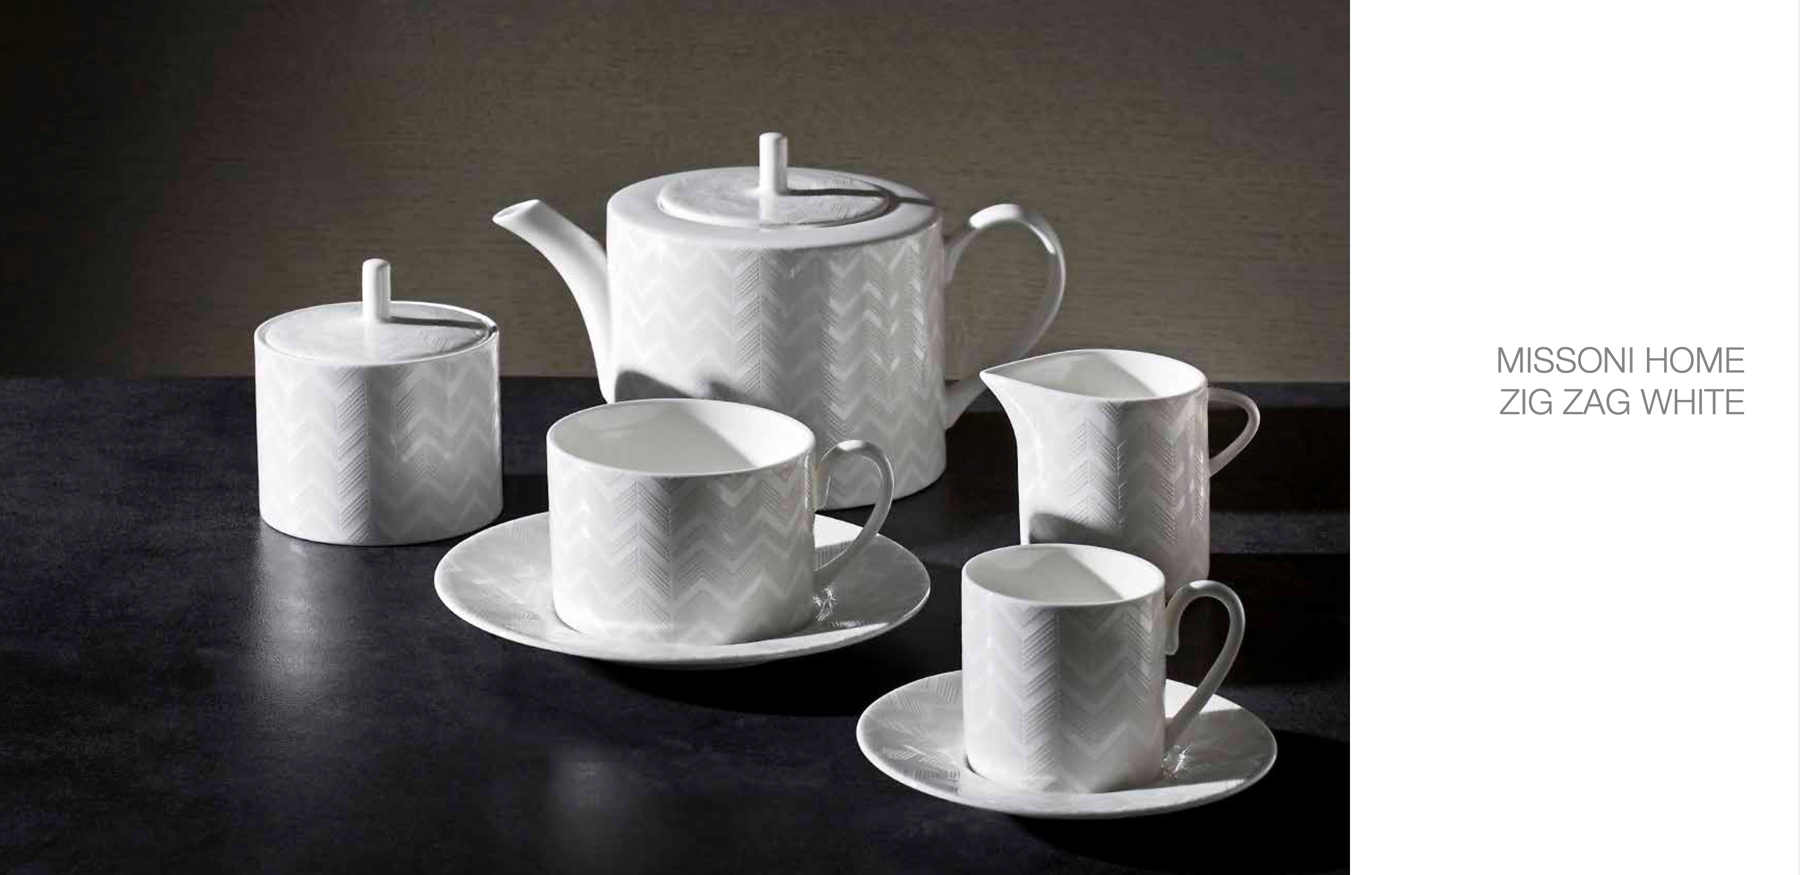 Missoni tableware for the stylish table setting